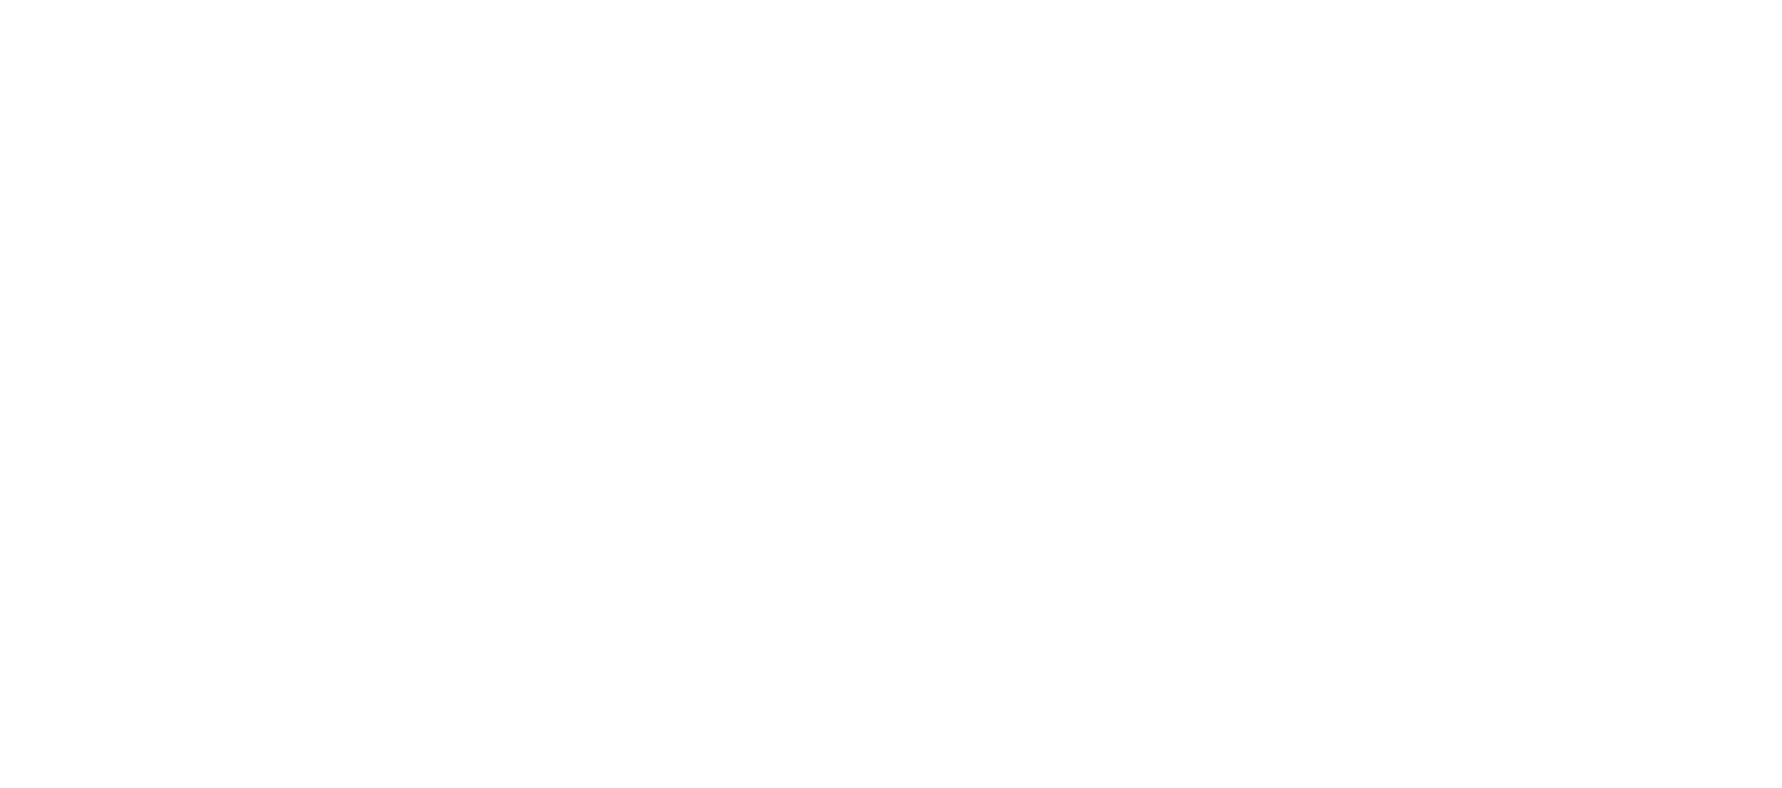 Herefordshire and Worcestershire logo